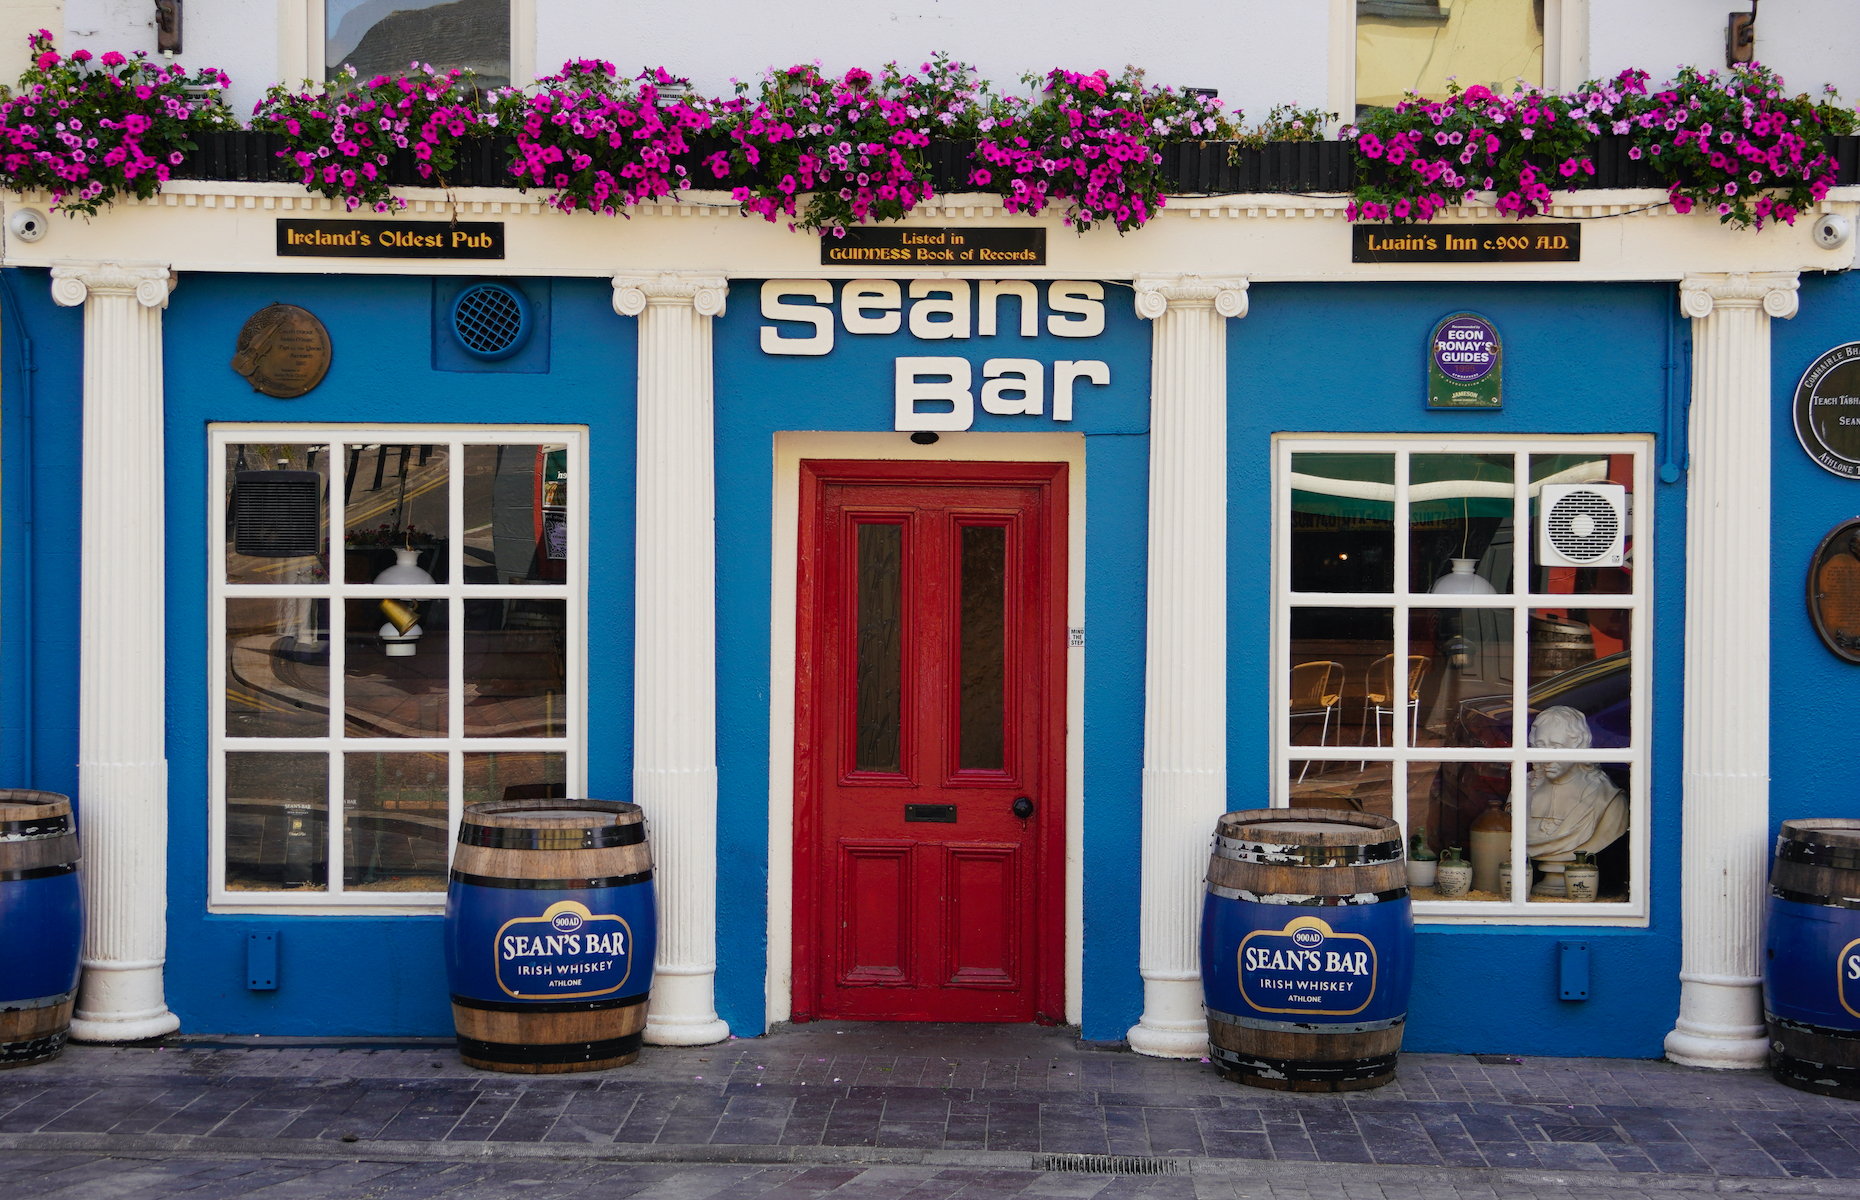 <p><a href="https://www.seansbar.ie/" rel="noreferrer noopener">Sean’s Bar</a><a href="https://www.seansbar.ie/" rel="noreferrer noopener">,</a> Europe’s oldest pub, is located in Athlone, Ireland. This Guinness record holder has been open since the 900s. Those planning to stay close to Dublin can also stop for a pint at The Brazen Head, a bar that’s been around since 1168.</p>